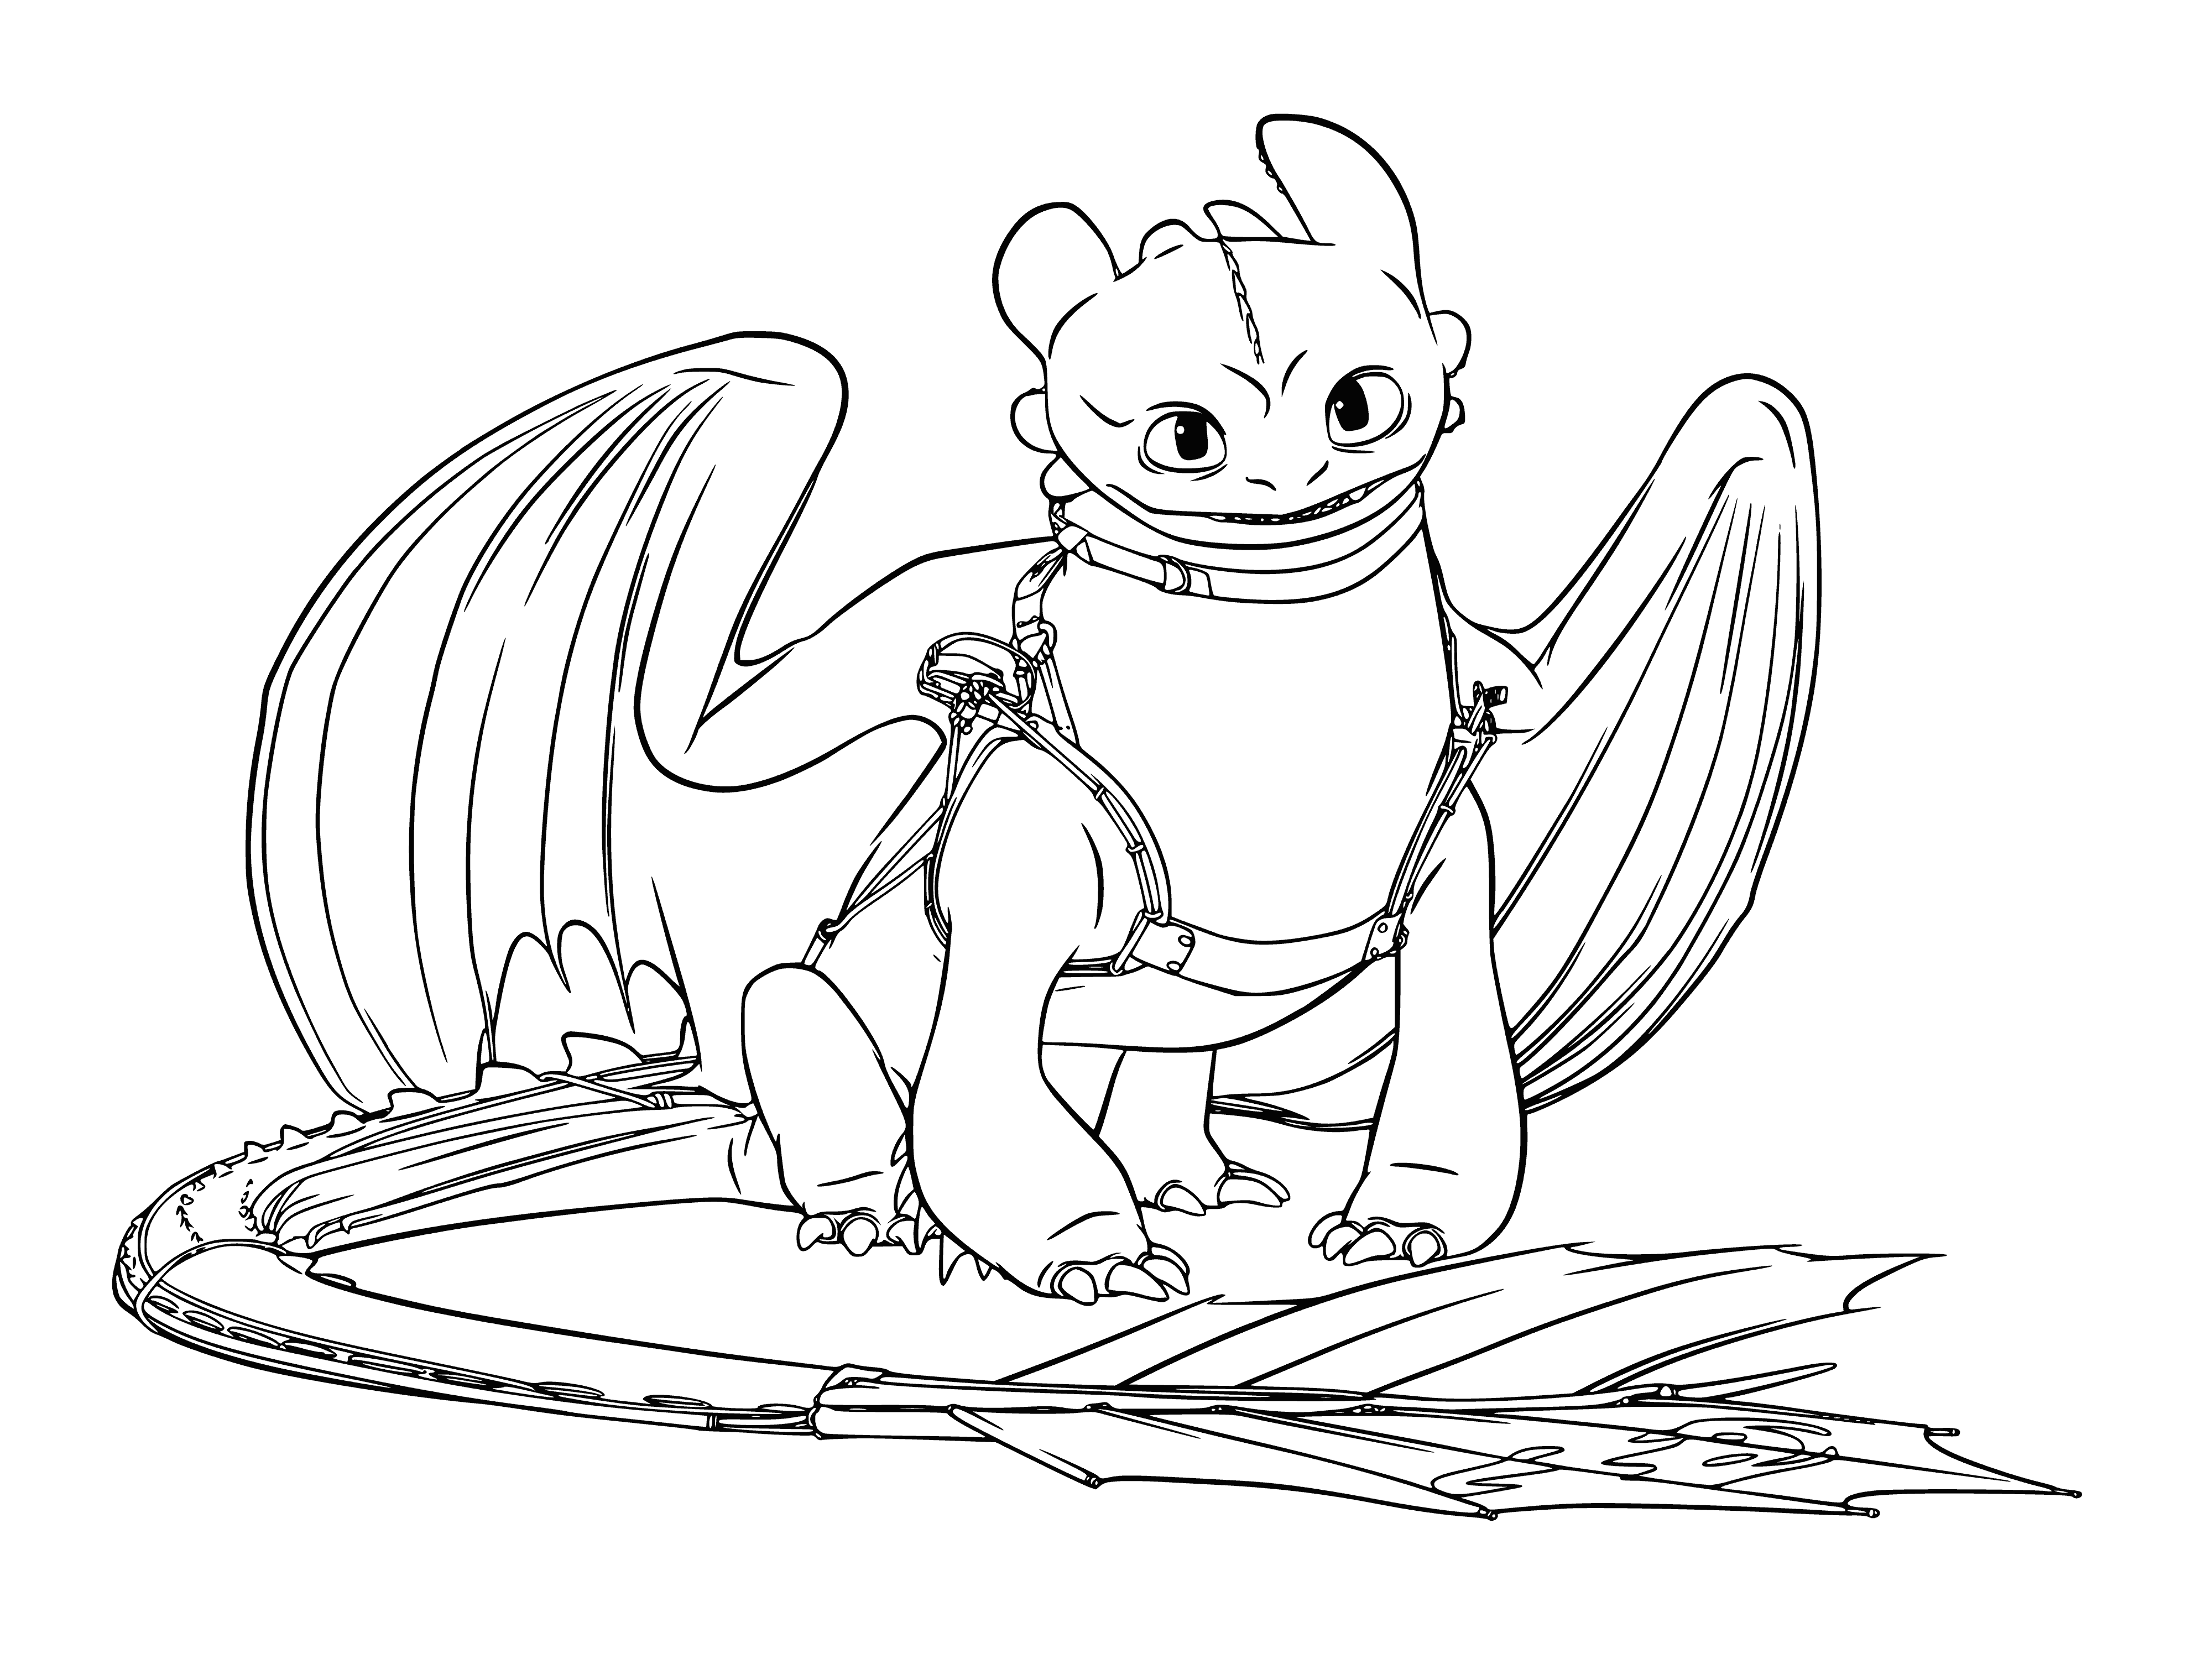 Bezzubik coloring page